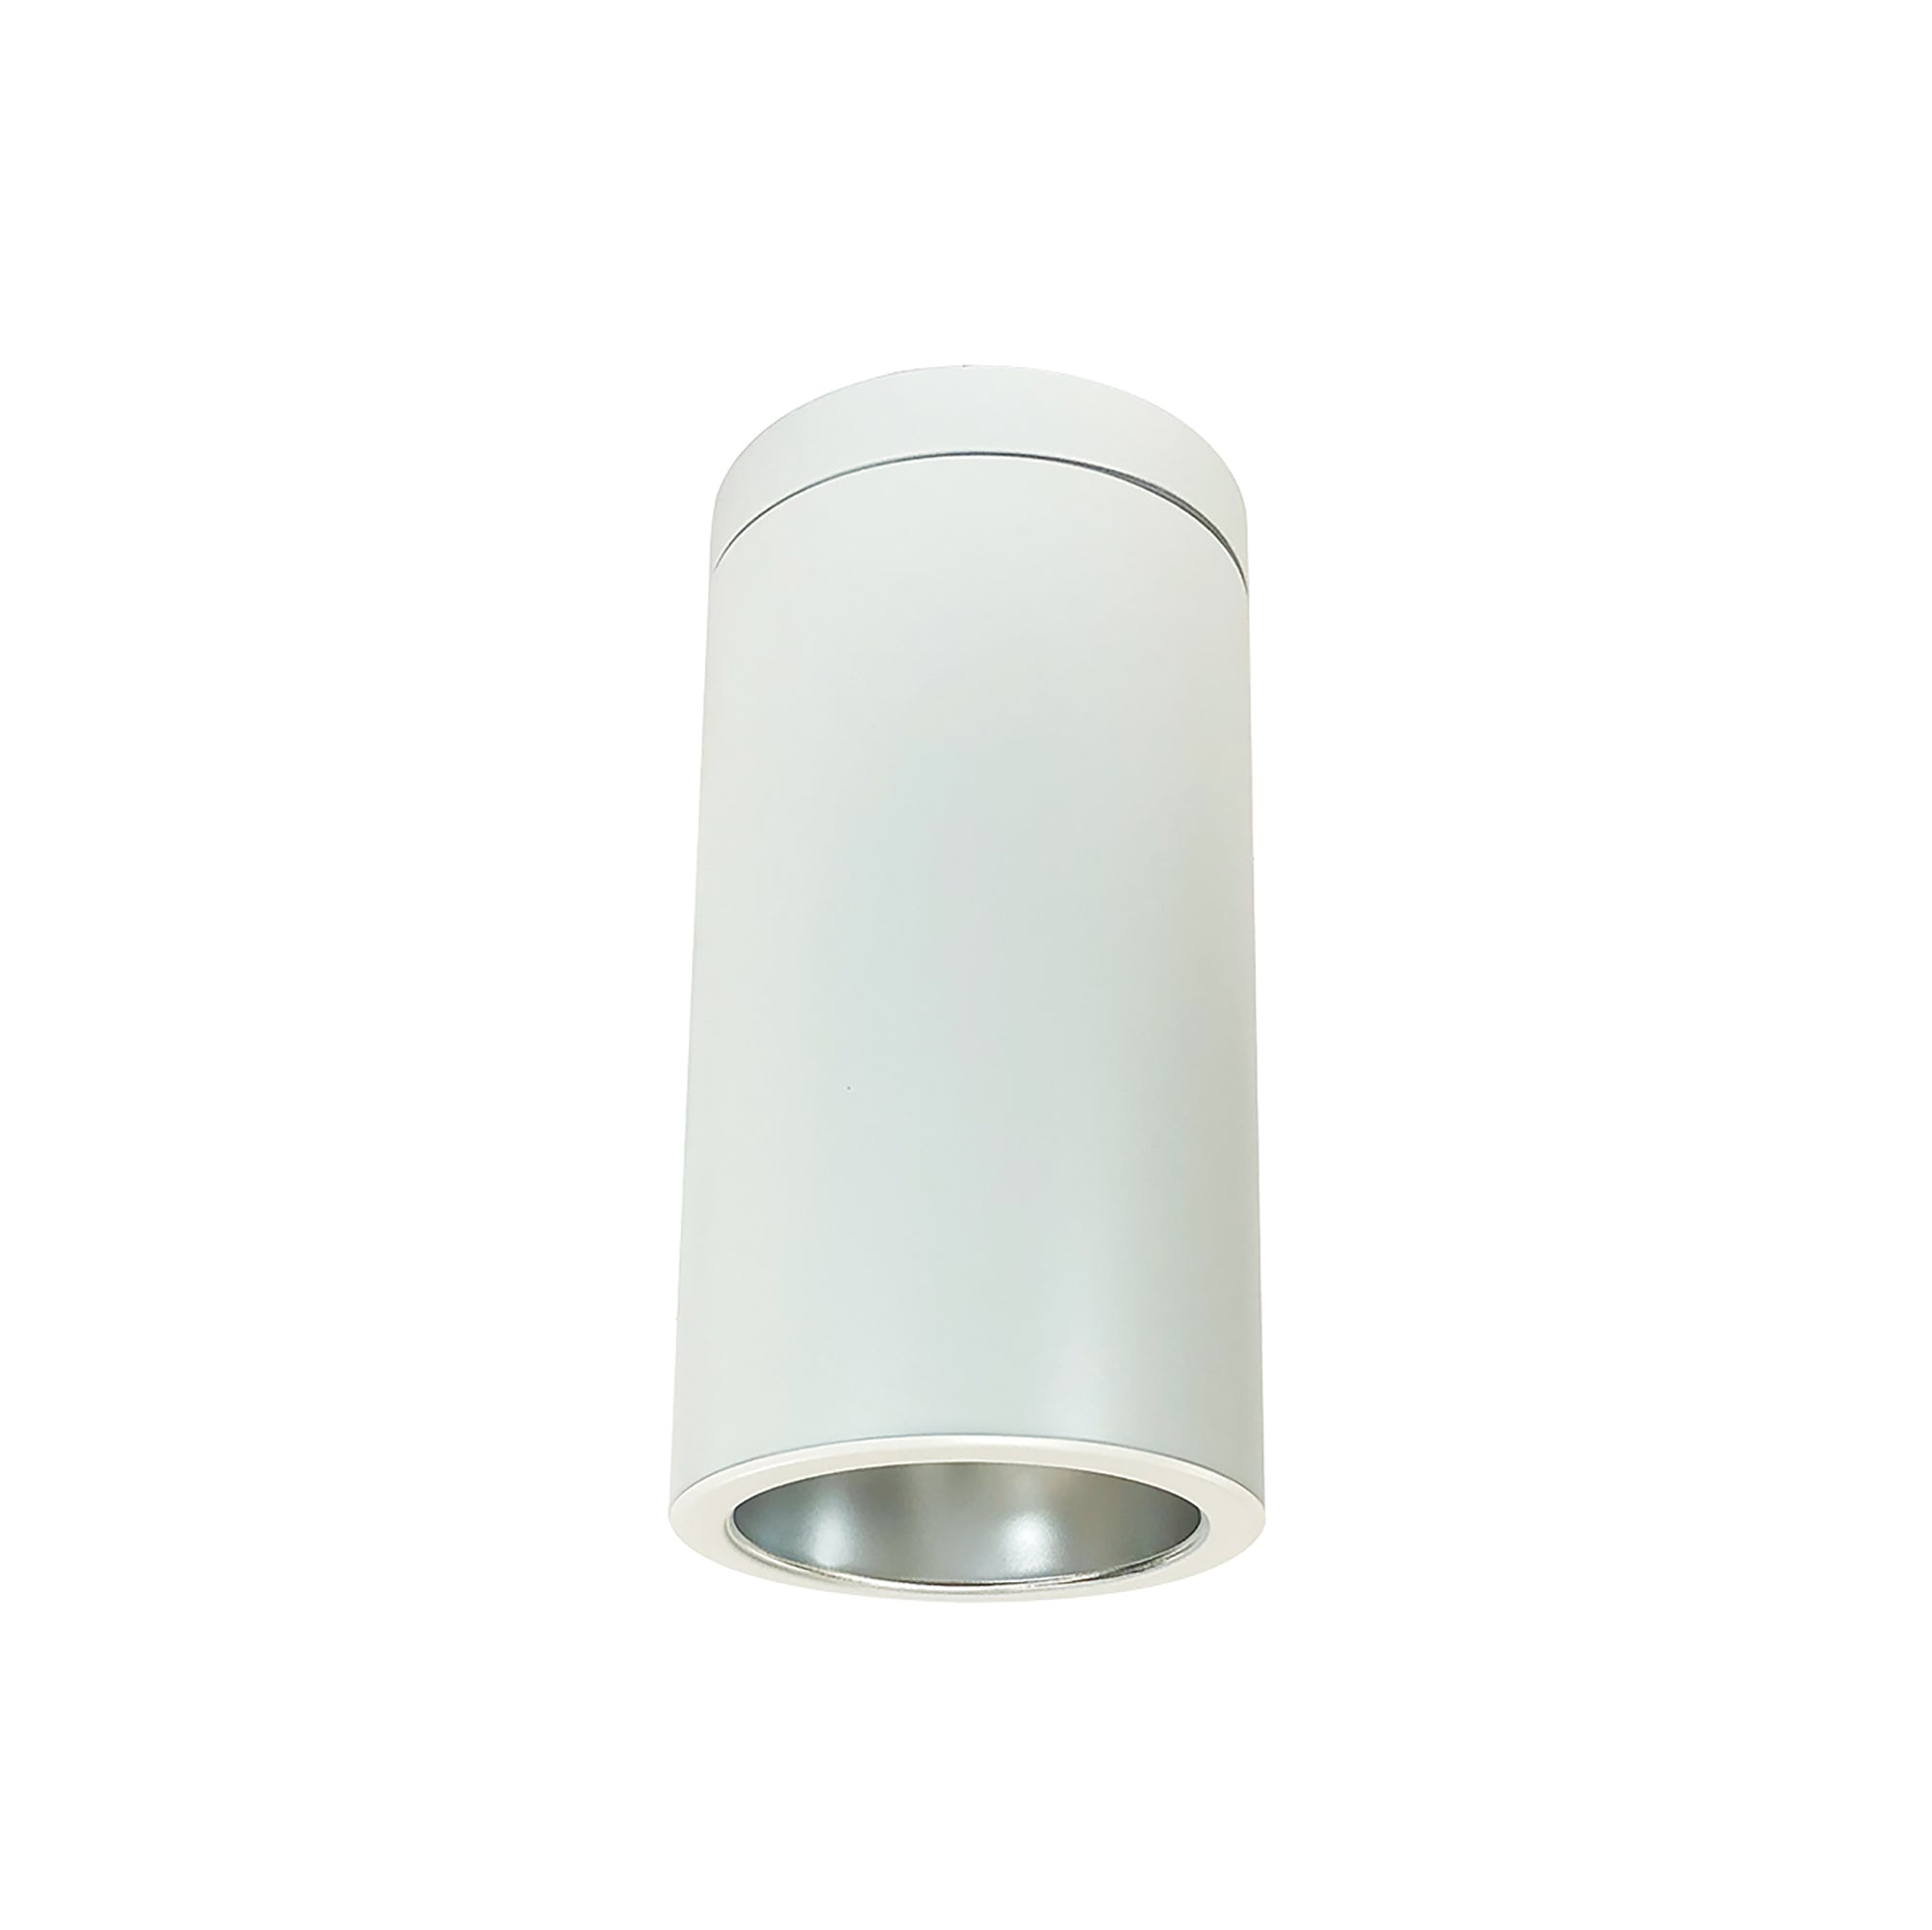 Nora Lighting NYLS2-6S15130SDWW6 - Cylinder - 6 Inch CYL SURFACE 1500LM REF SPOT 30K DIFF/WHT WHT CYL 120-277 0-10V